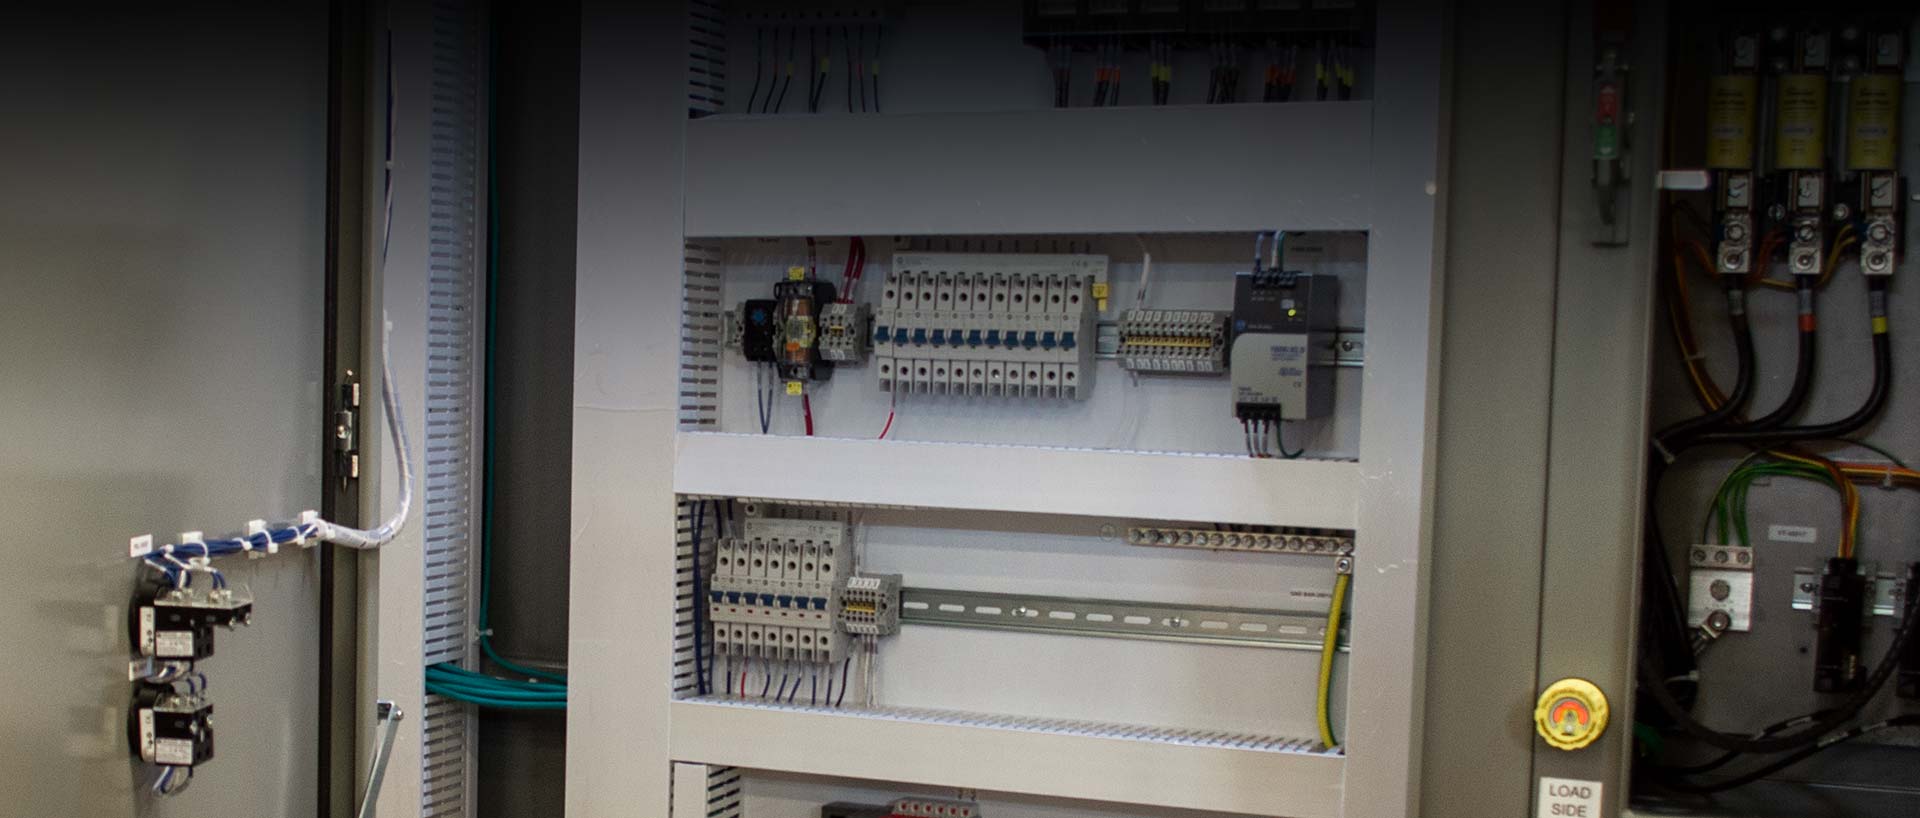 Industrial control panel fabrication